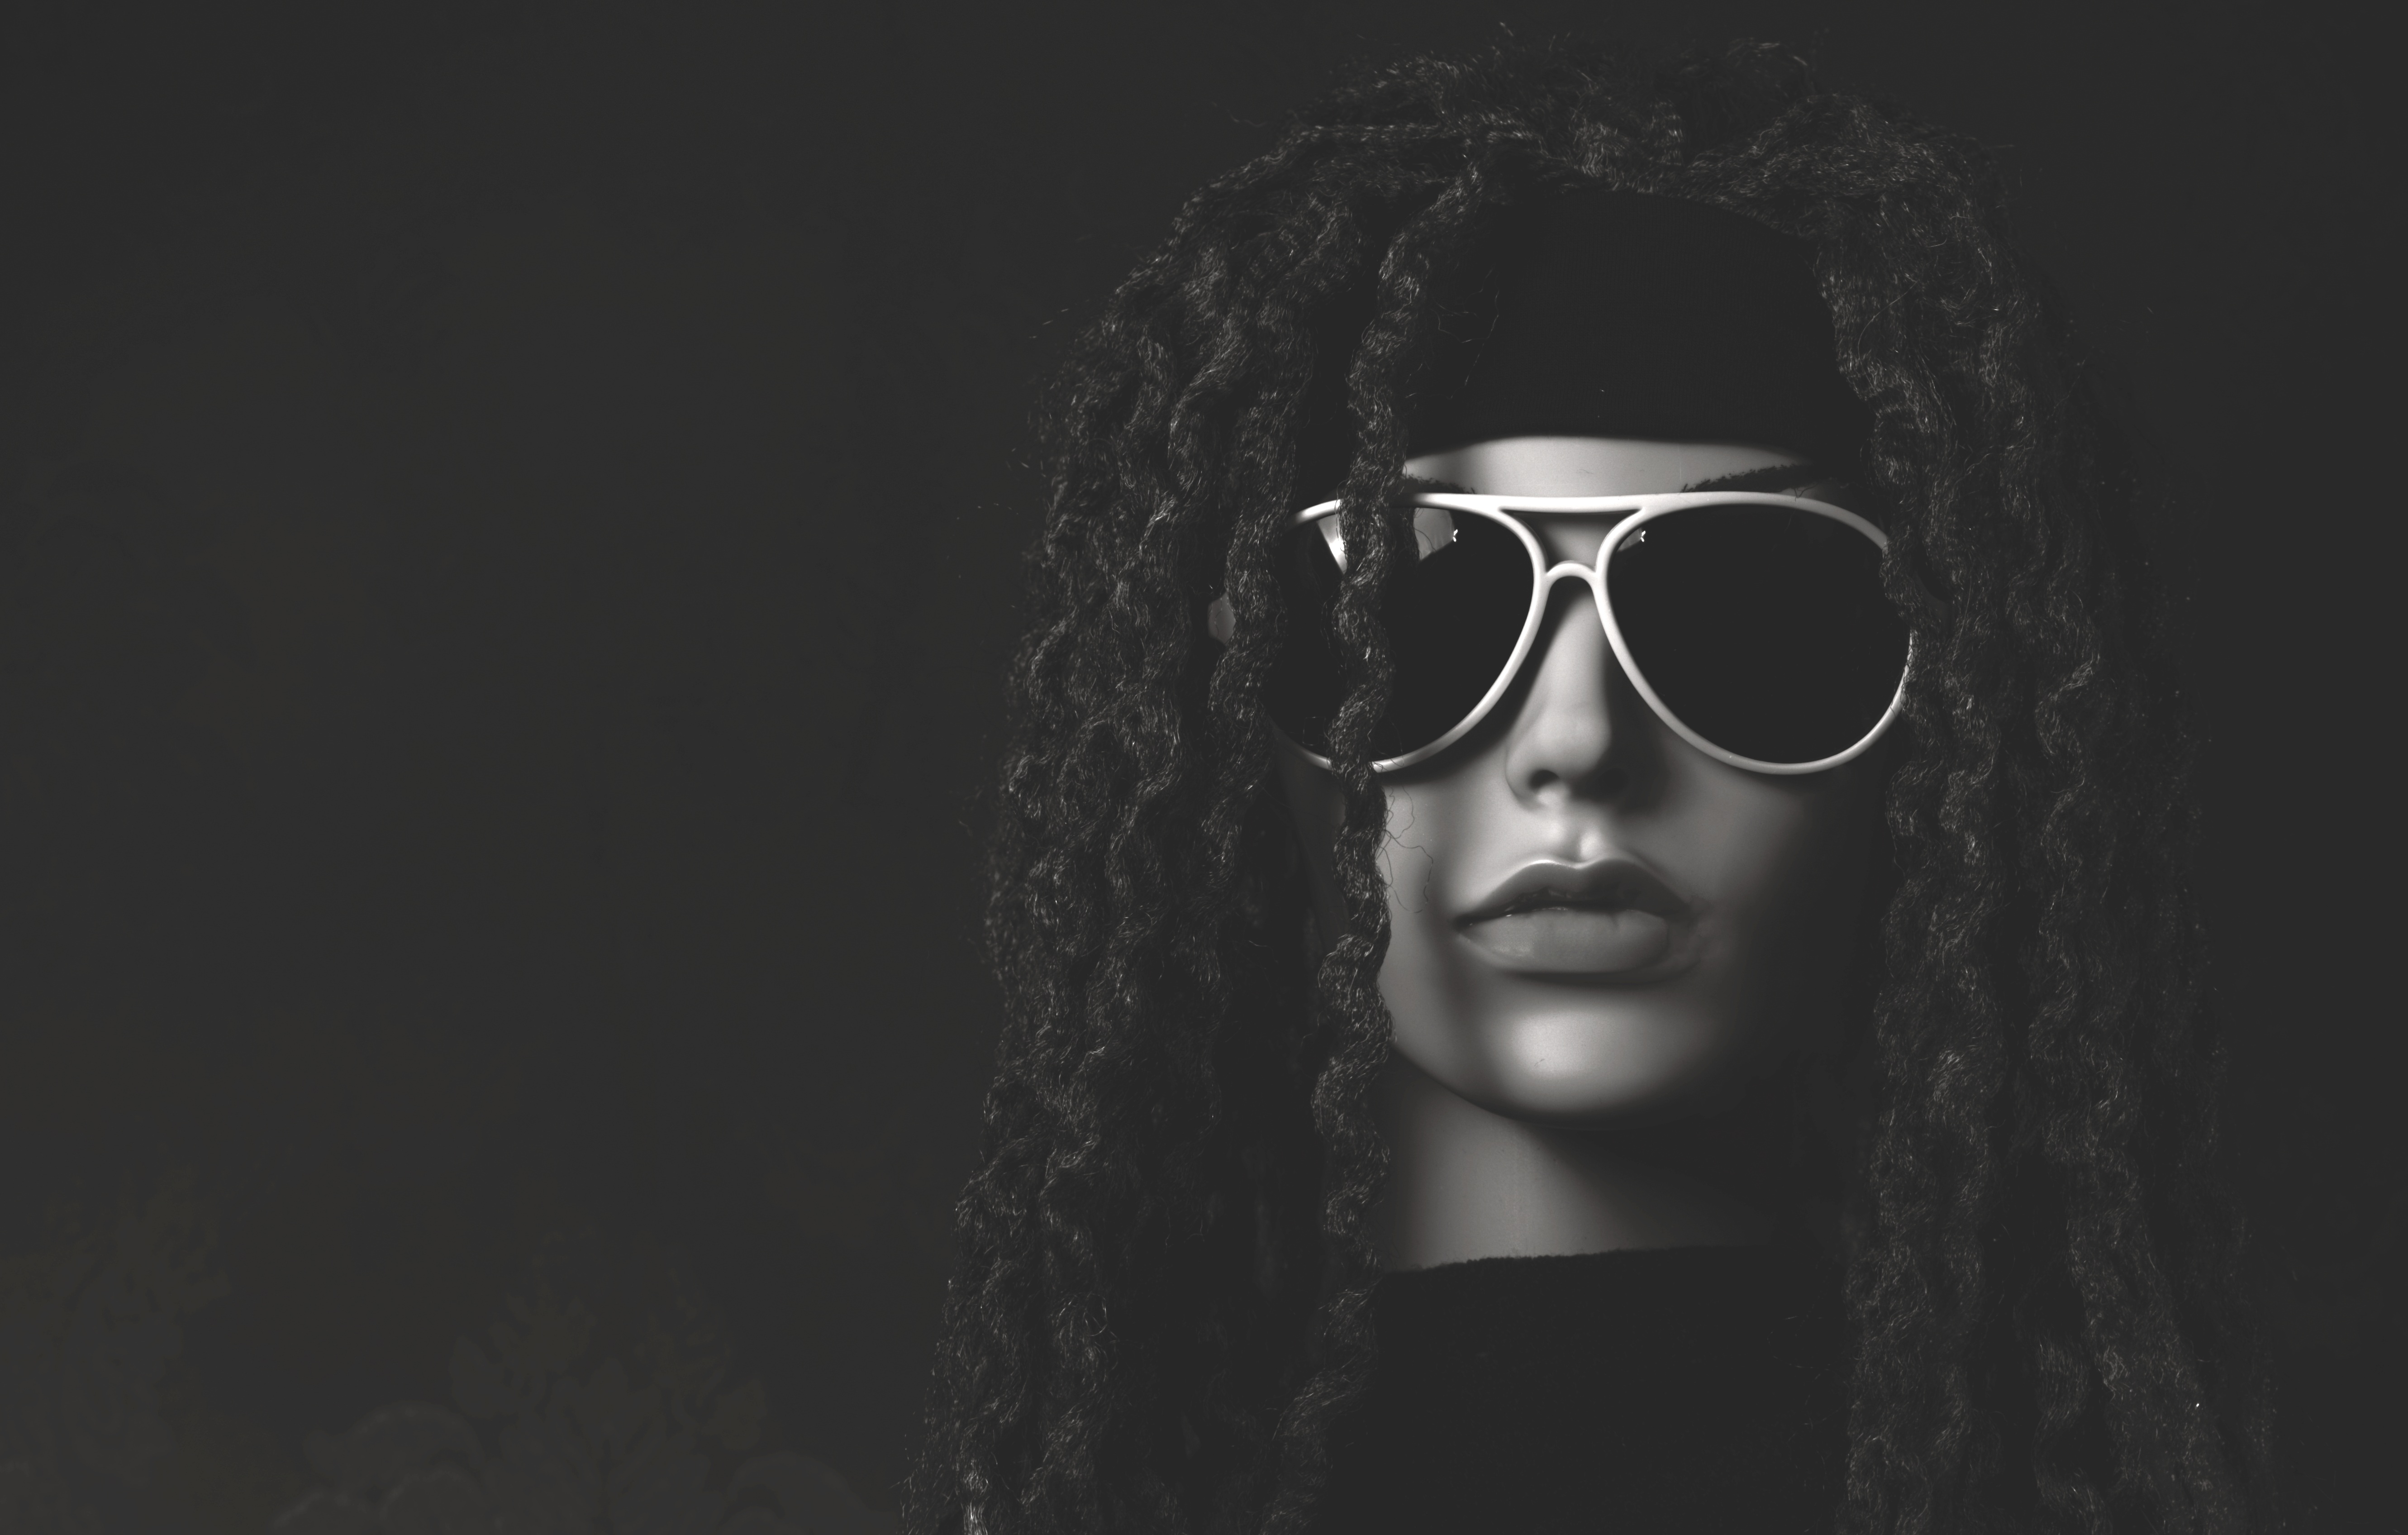 96441 download wallpaper black, bw, chb, portrait, glasses, spectacles, dummy, mannequin, dreadlocks screensavers and pictures for free